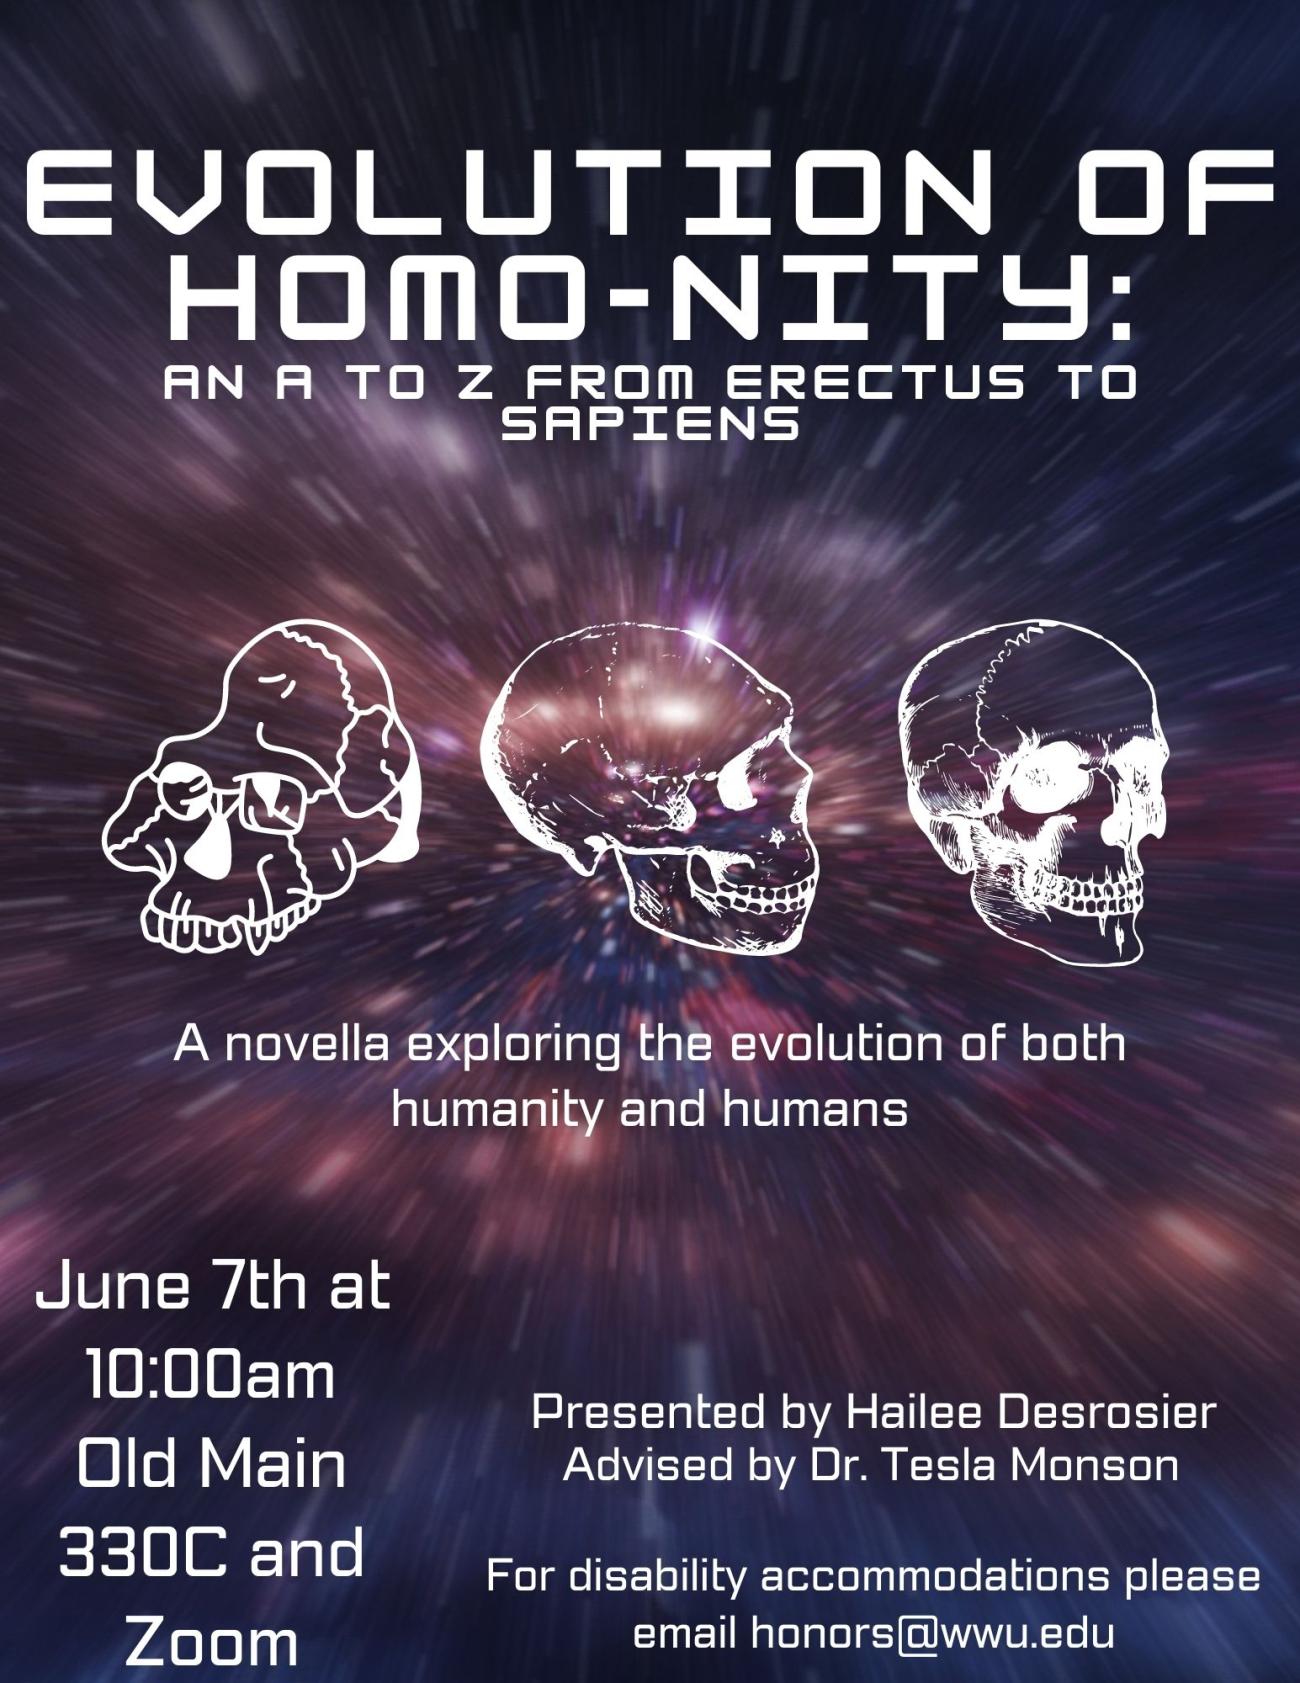 A poster with a starry background containing three screen-printed images of skulls. Text reads "Evolution of Homo-nity: An A to Z from Erectus to Sapiens. A novella exploring the evolution of both humanity and humans. Presented by Hailee Desrosier, advised by Dr. Tesla Monson. June 7th at 10:00am Old Main and Zoom. For disability accommodations, please email honors@wwu.edu."